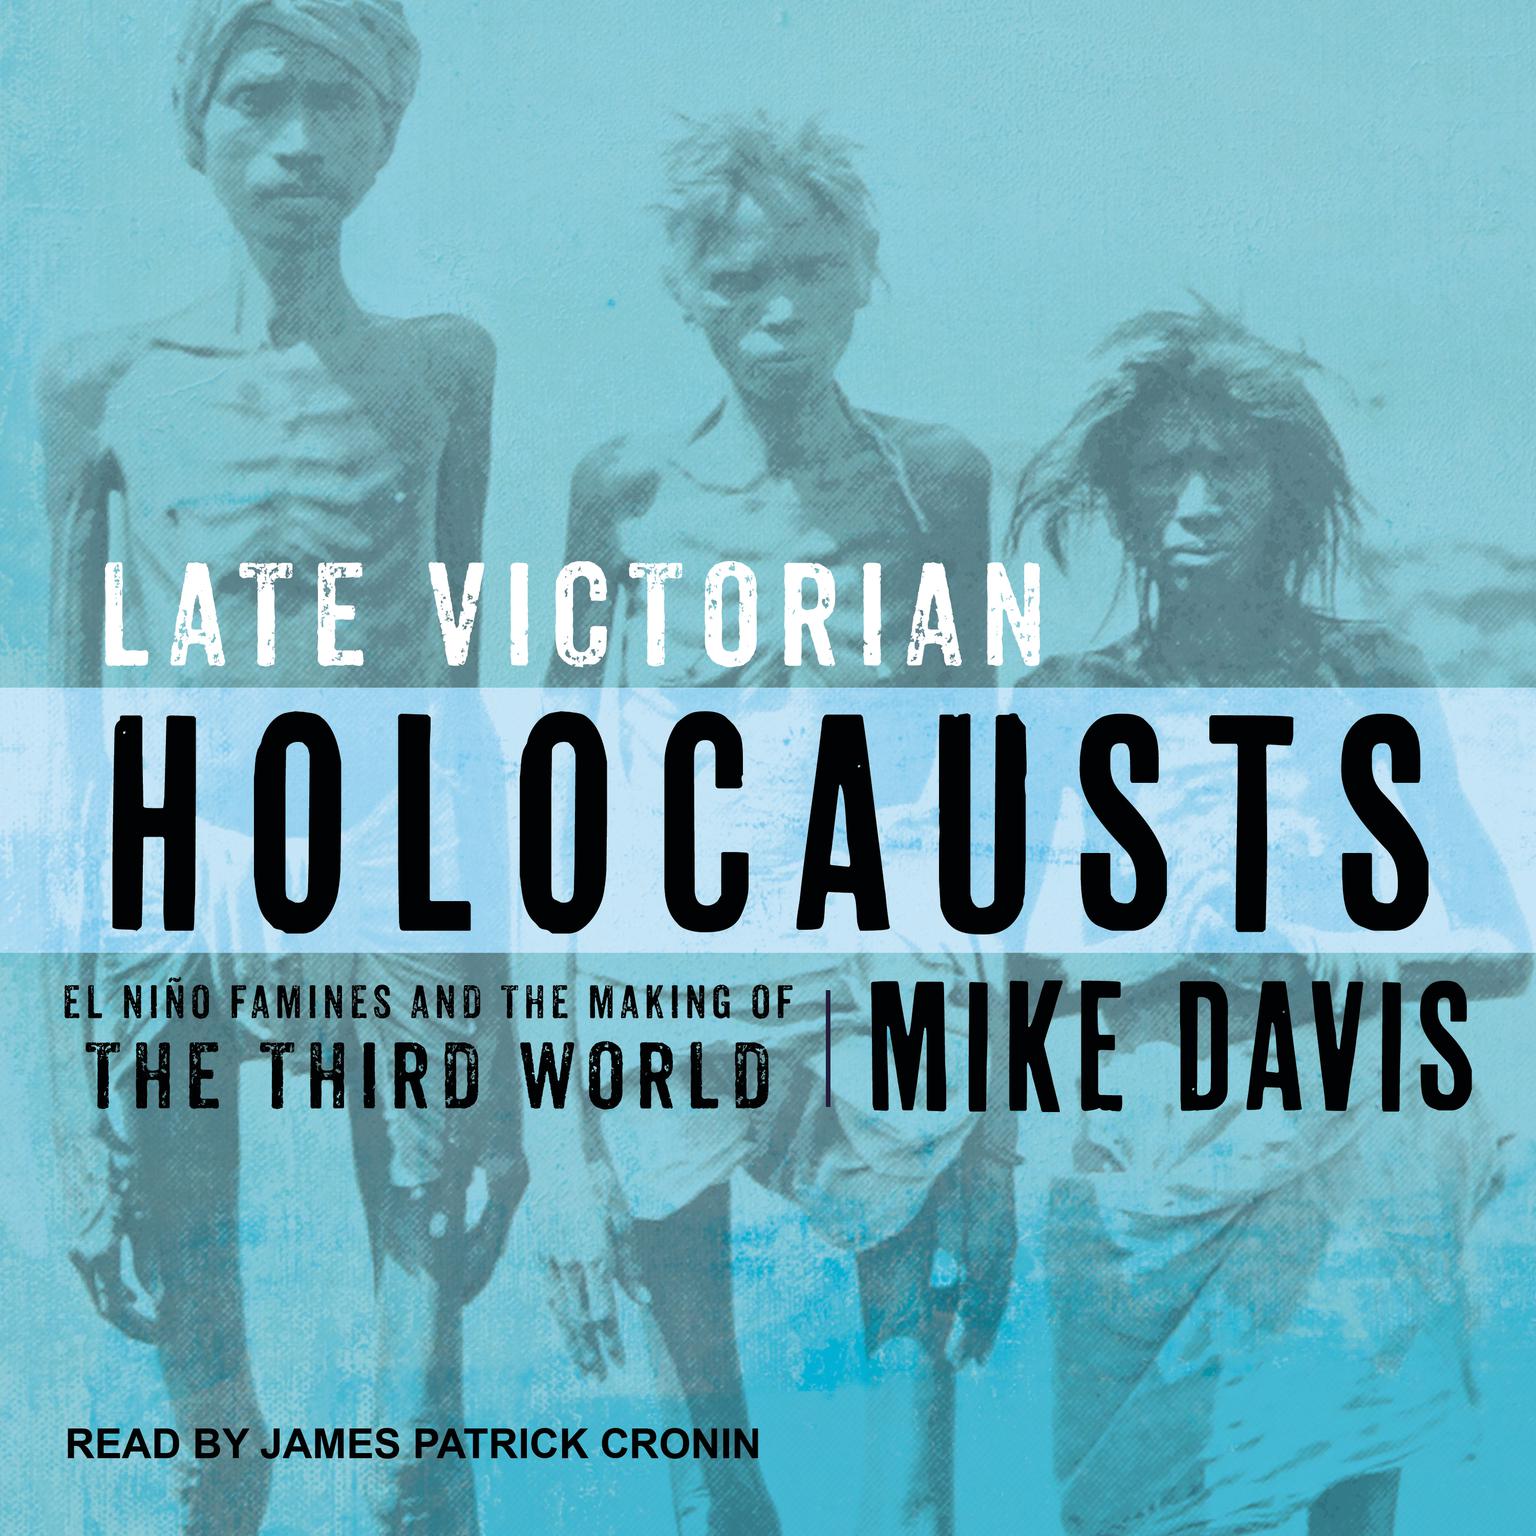 Late Victorian Holocausts: El Niño Famines and the Making of the Third World Audiobook, by Mike Davis